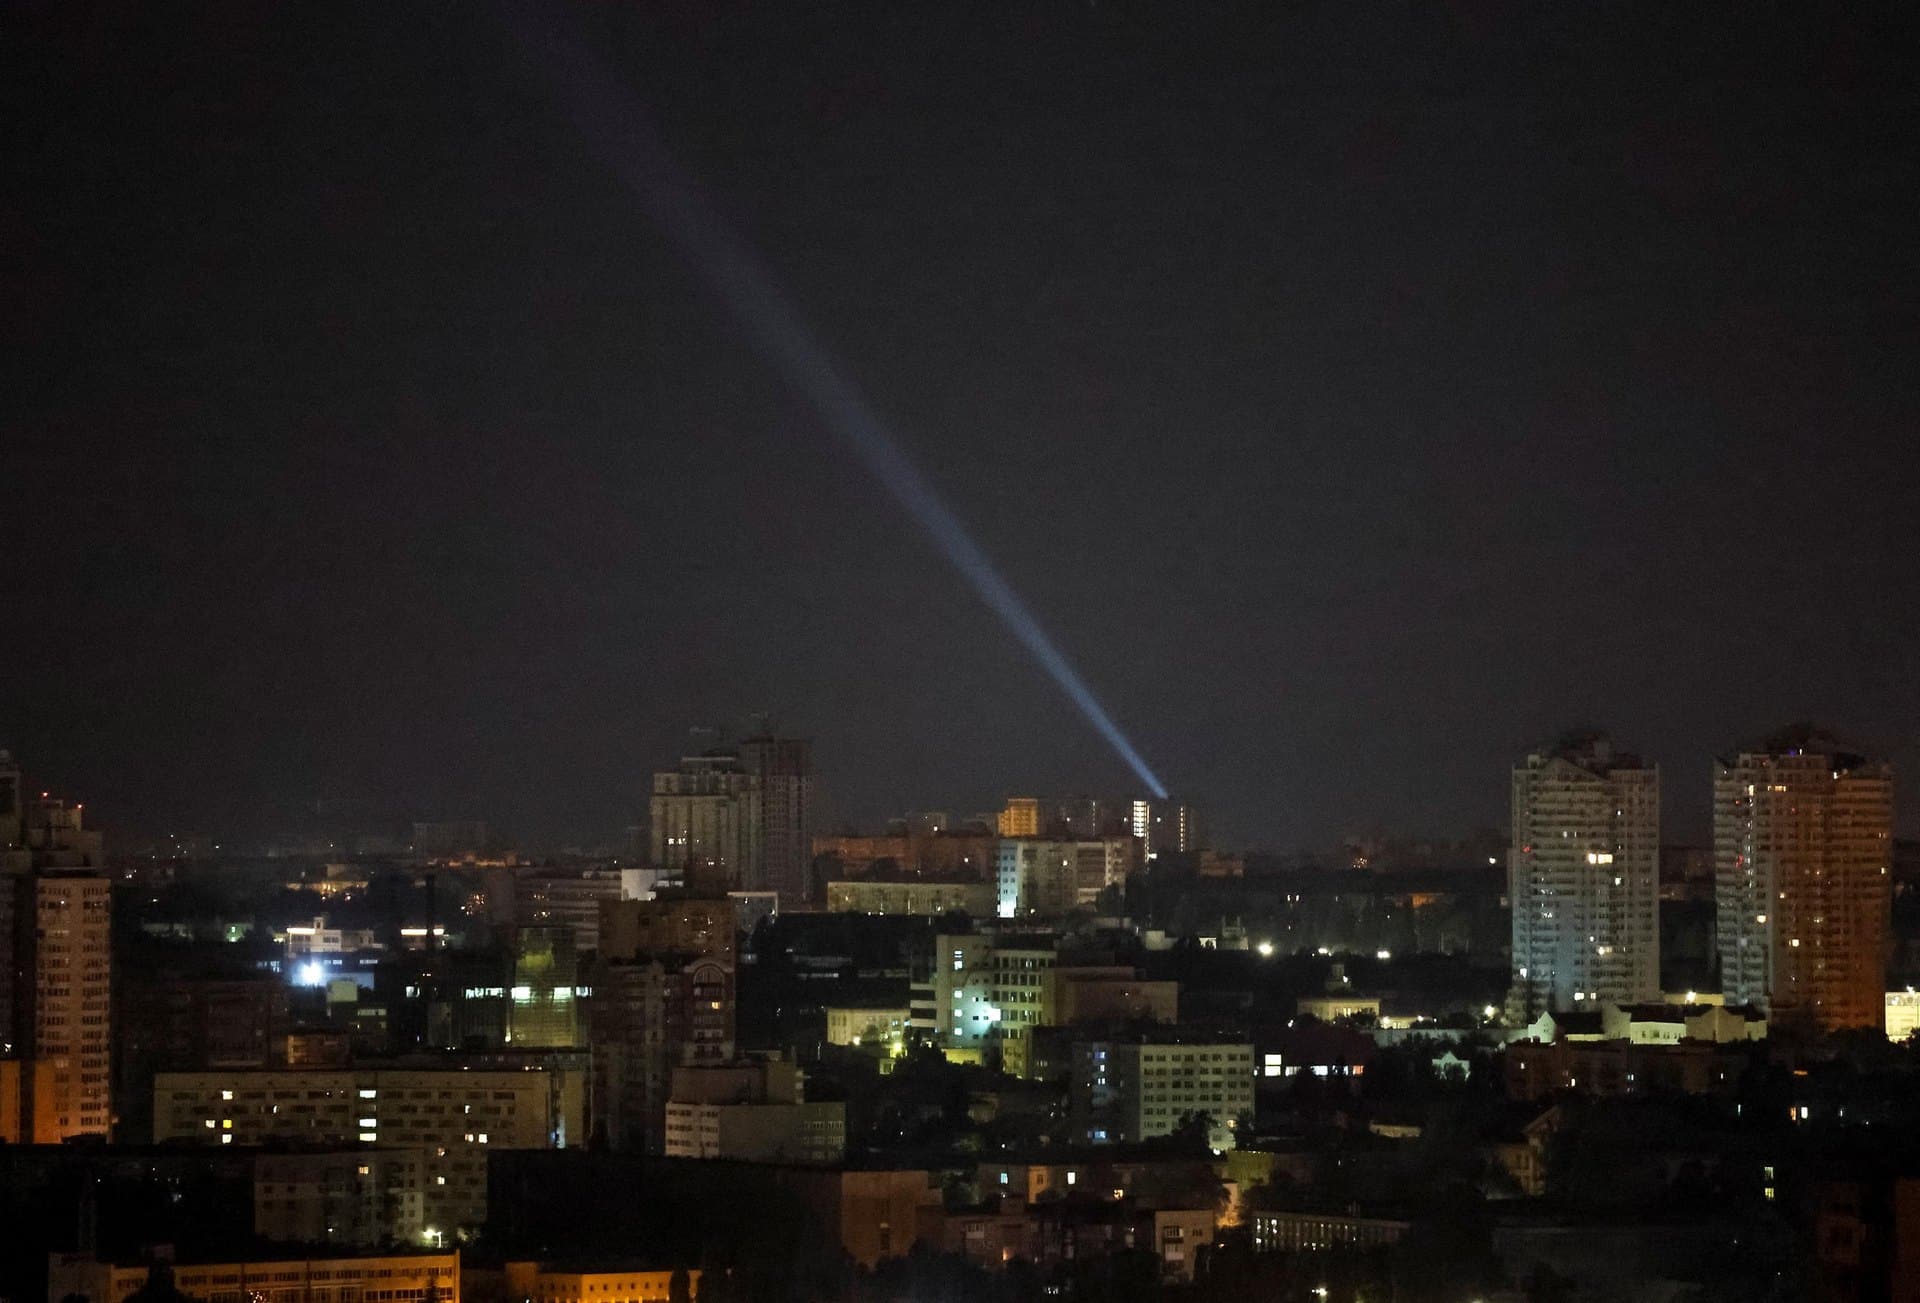 Ukrainian forces use a searchlight to scan the sky during a Russian drone strike in Kyiv